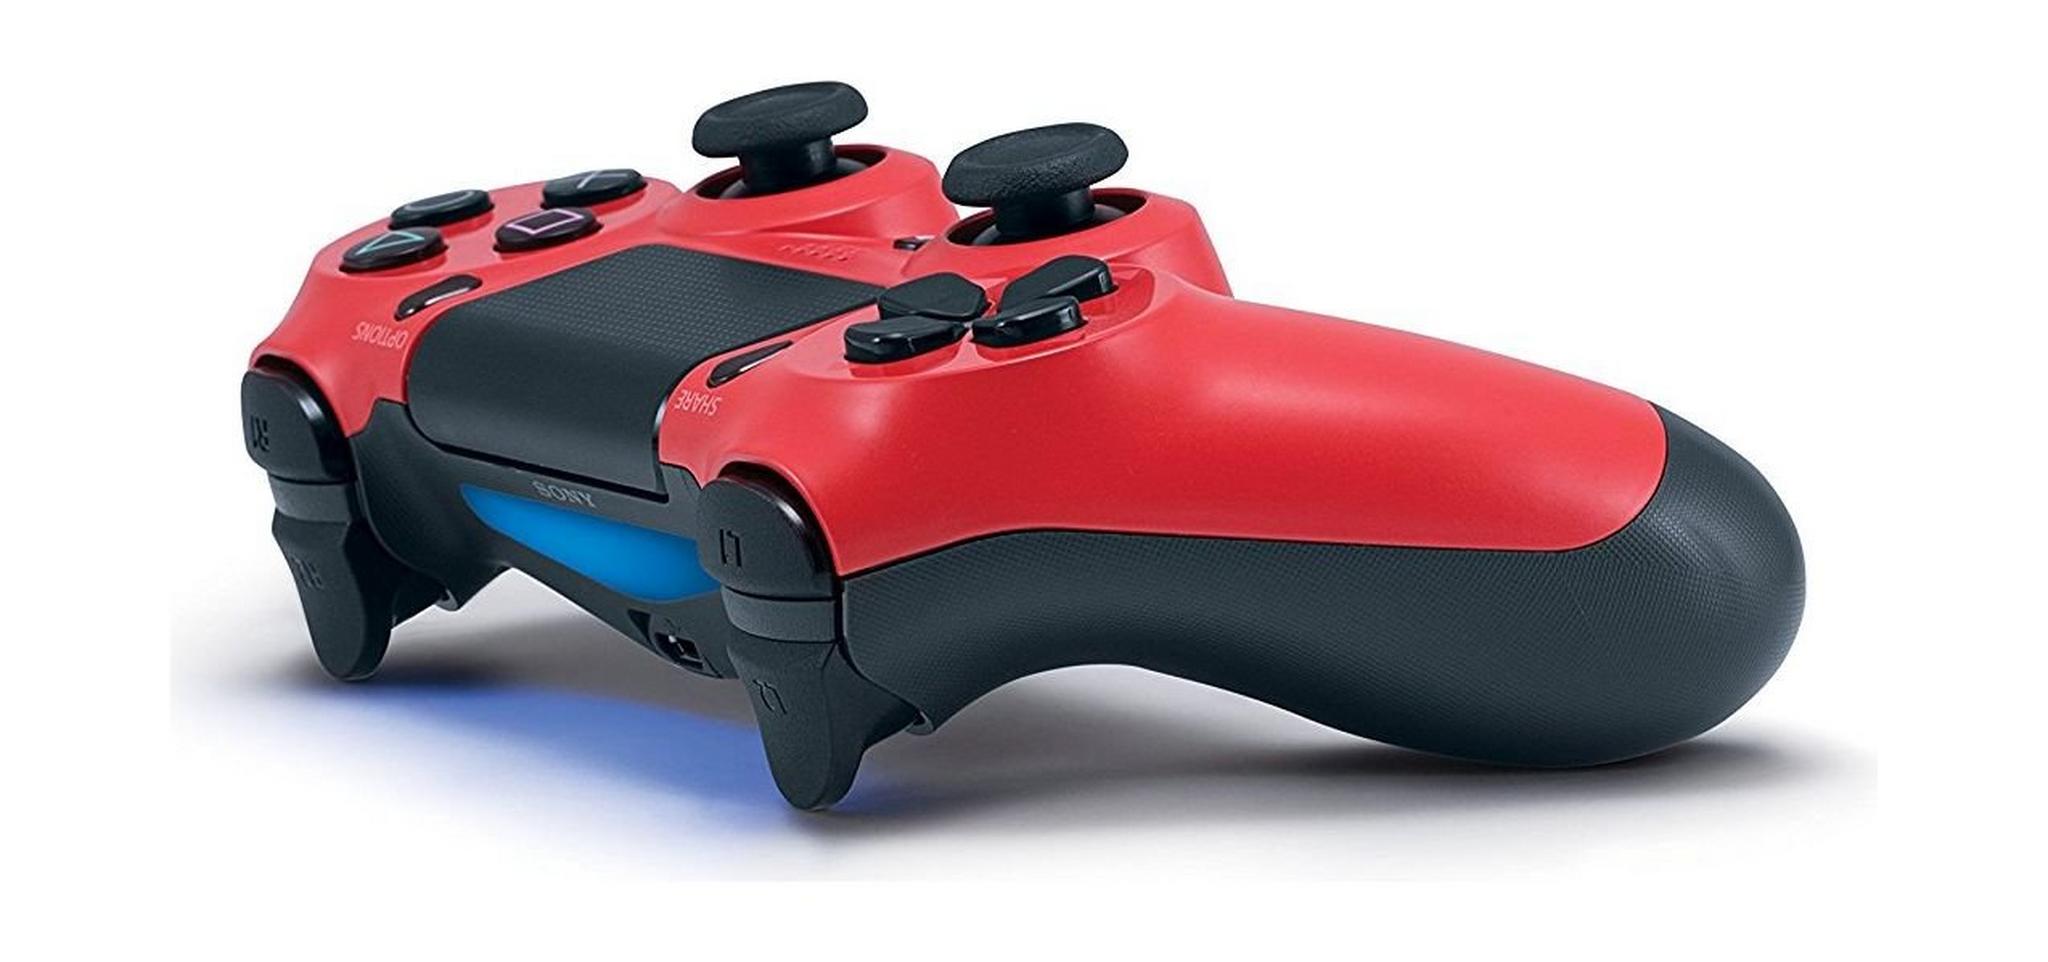 Sony PS4 Controller DualShock 4 Wireless – Red V2